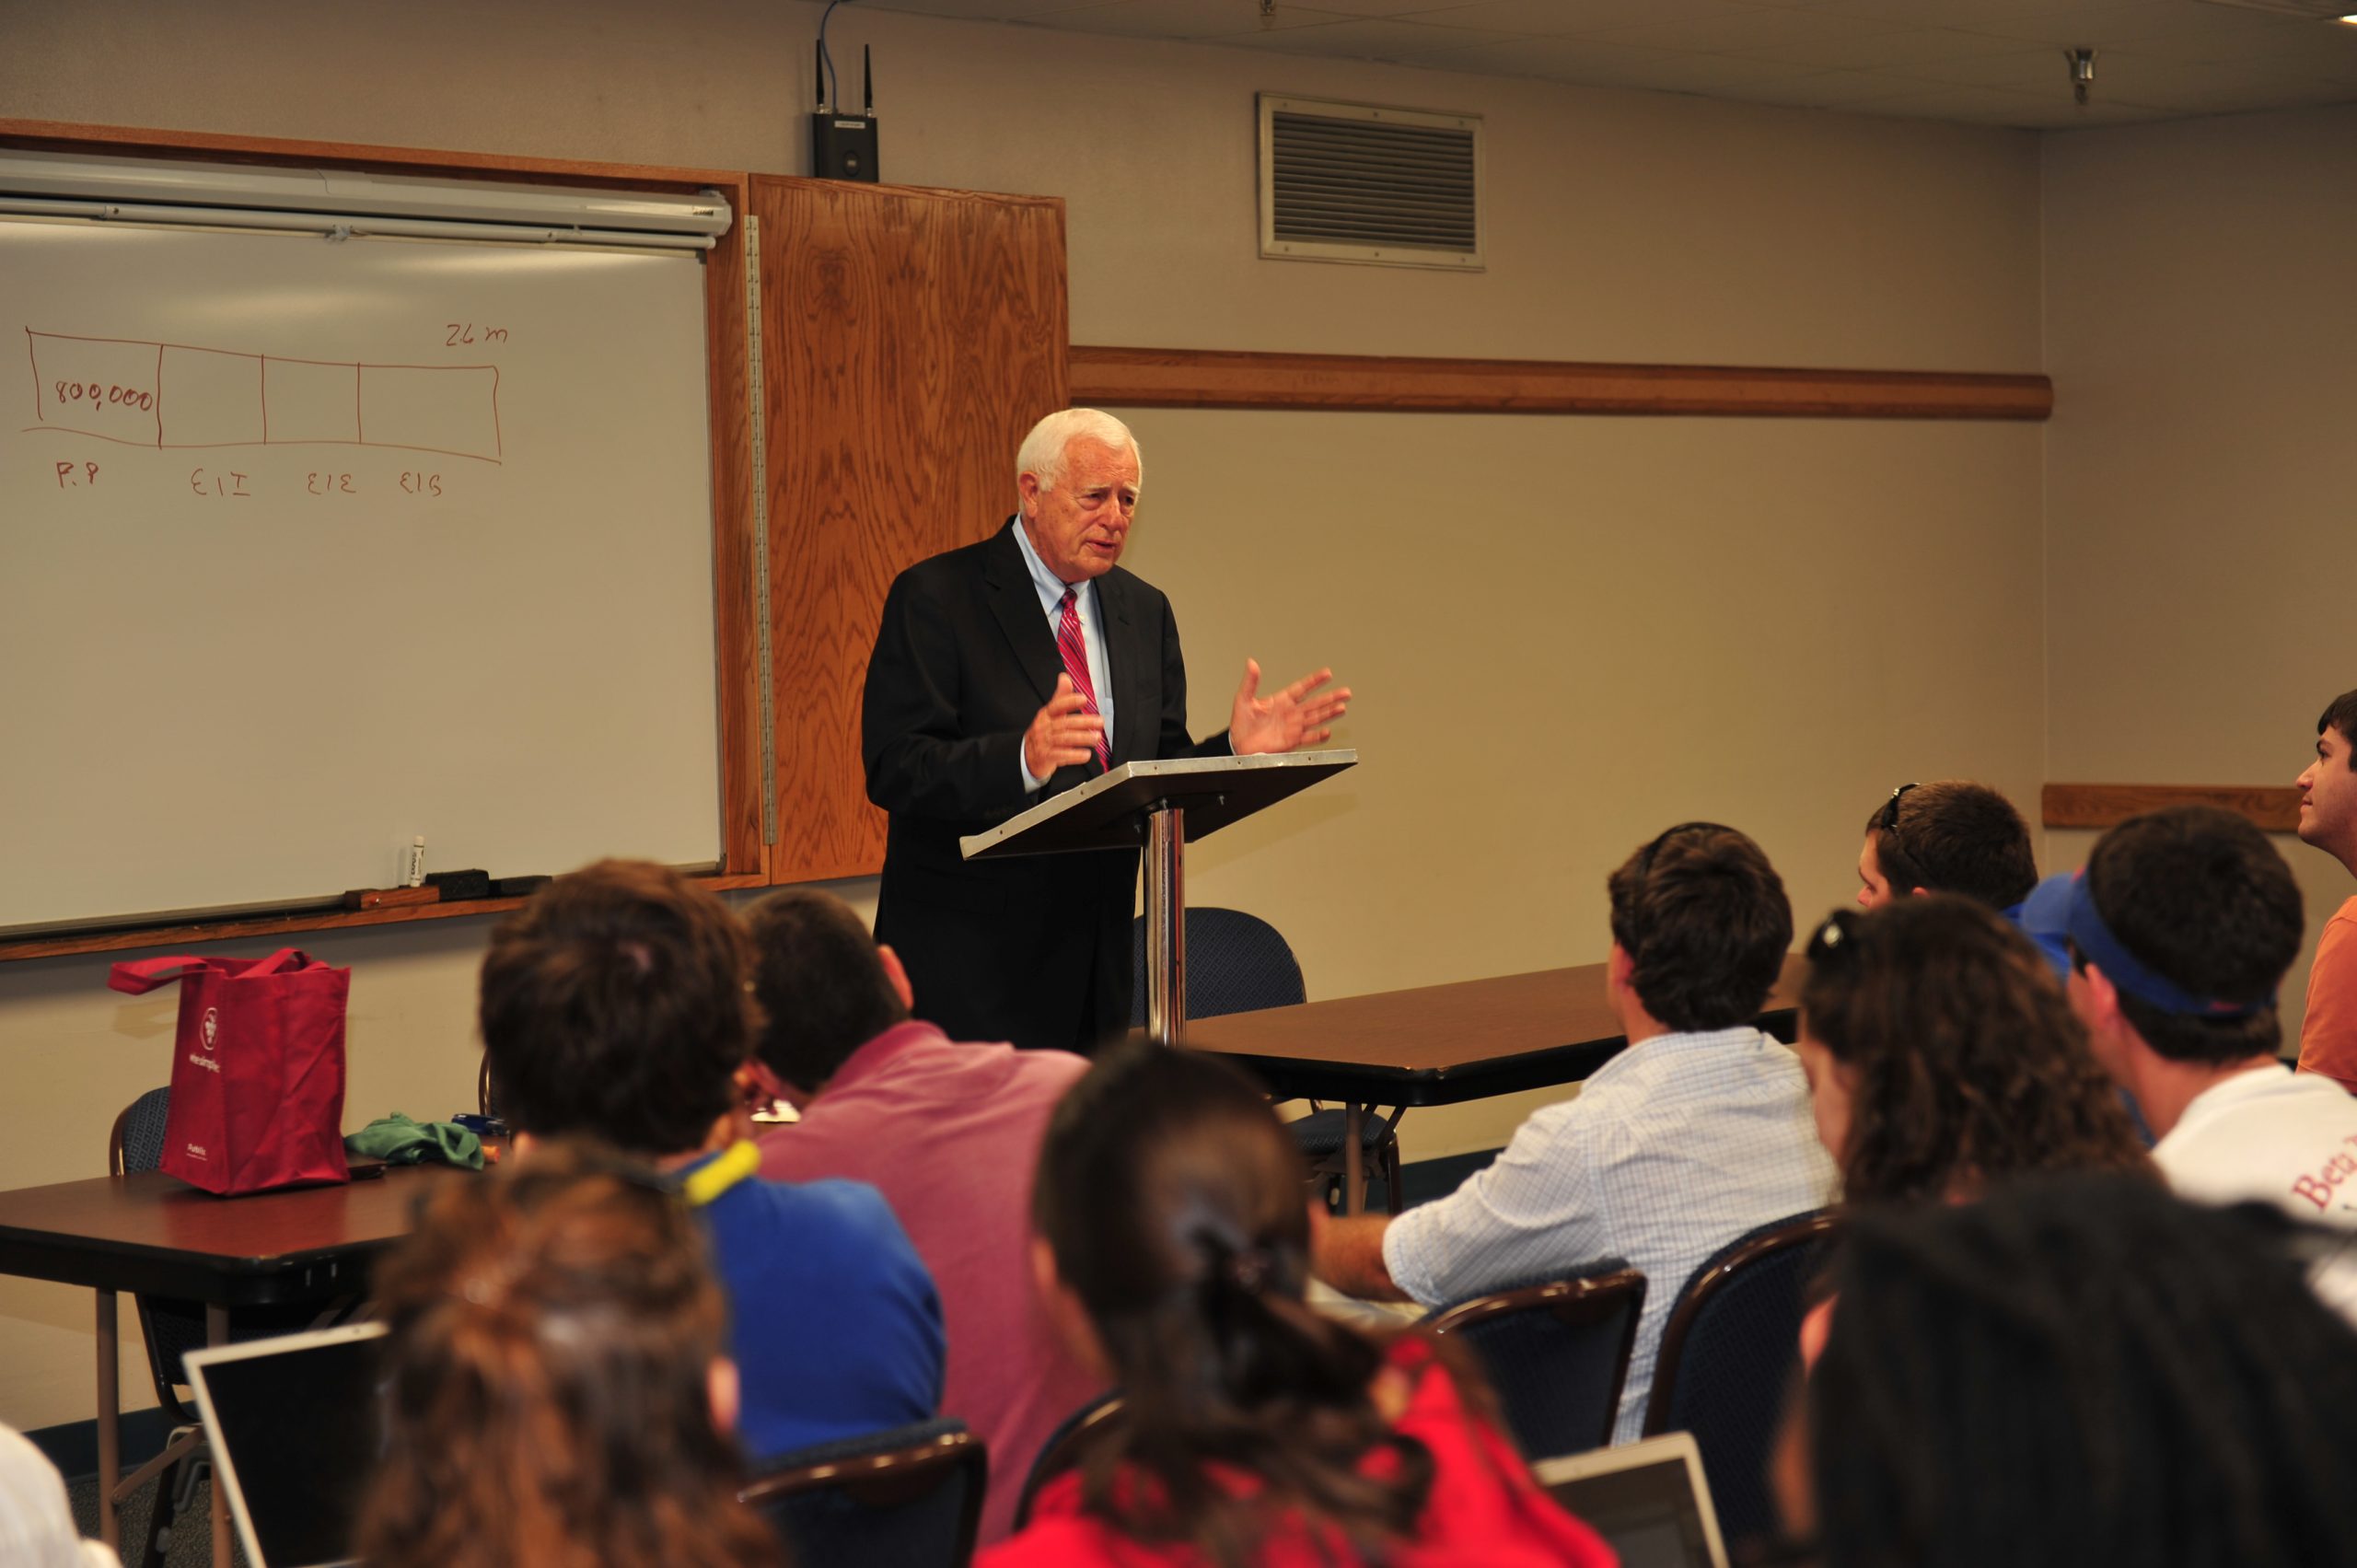 Bob Alligood delivers a lecture to students